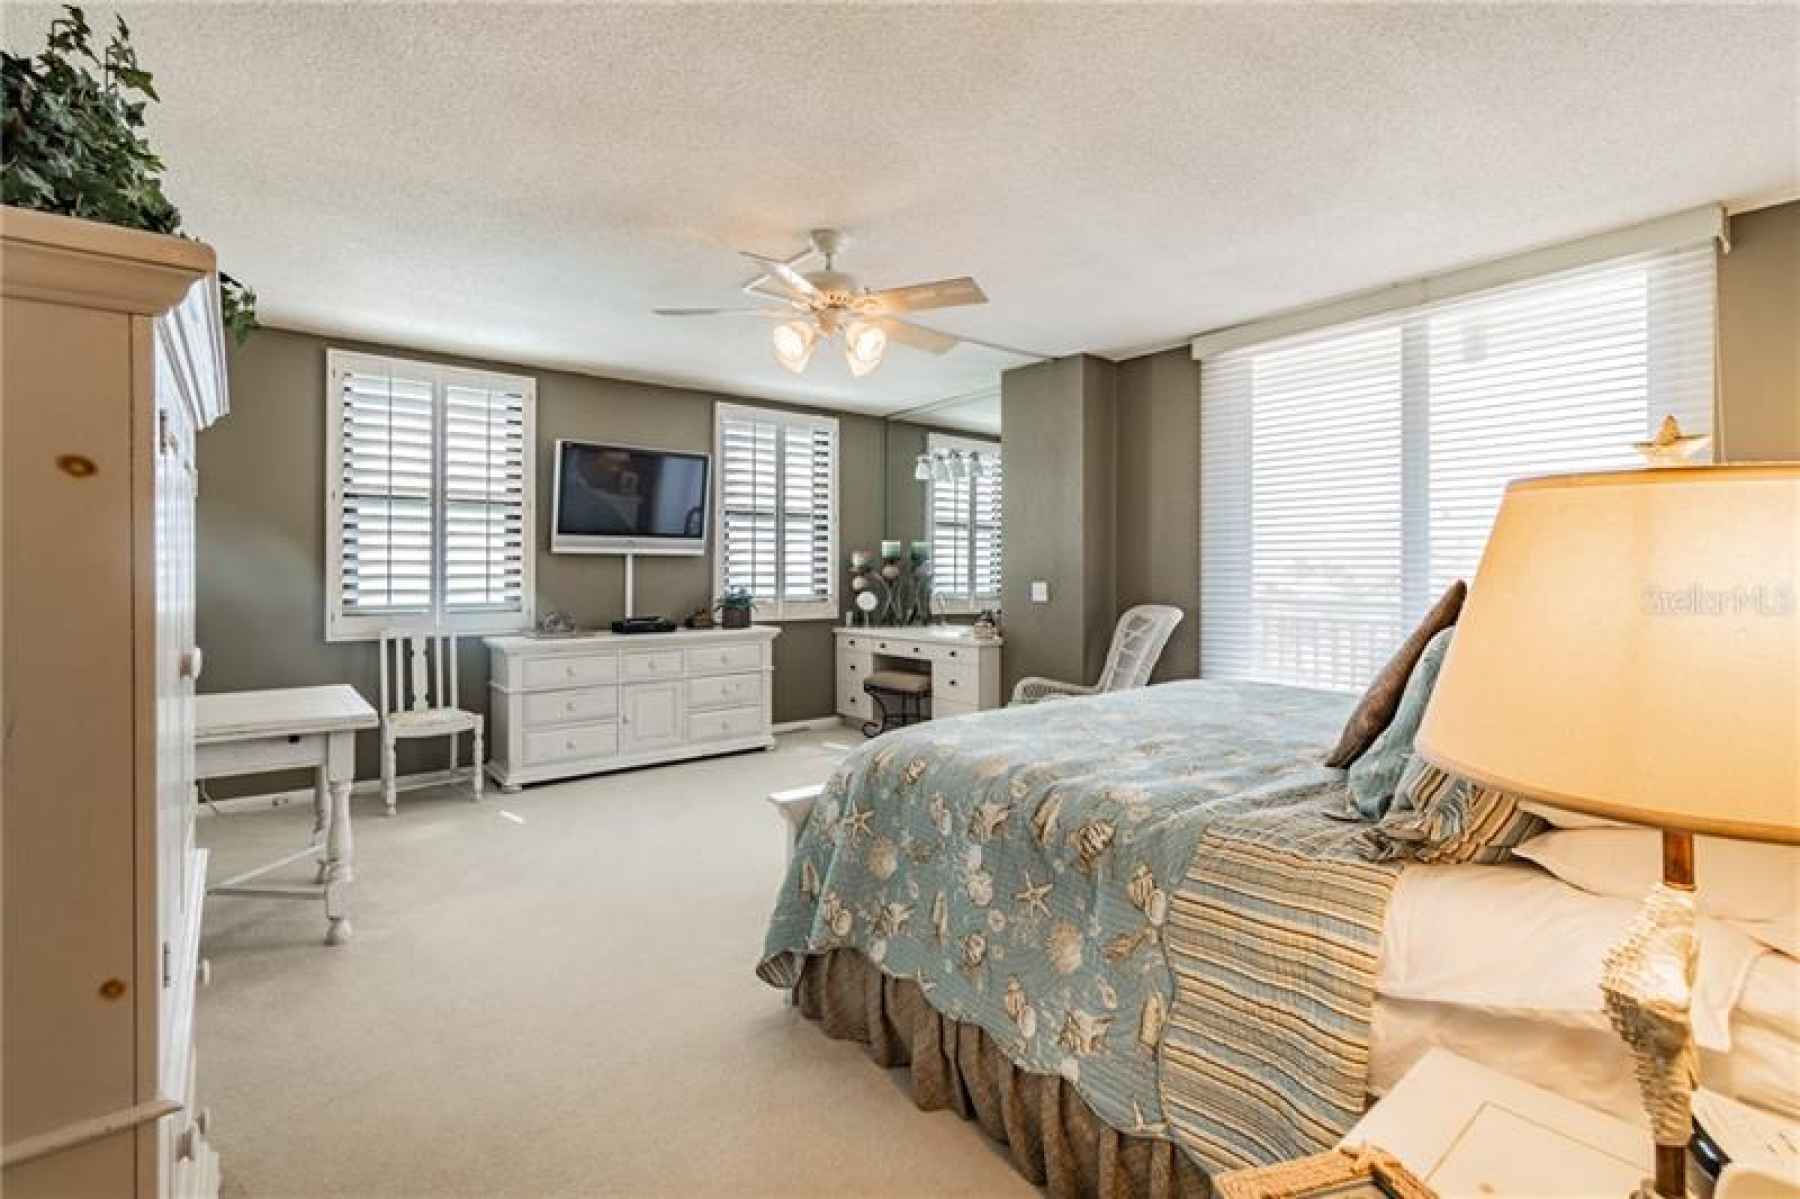 Enter the Spacious Master Bedroom, with Open Patio Access & Water Views